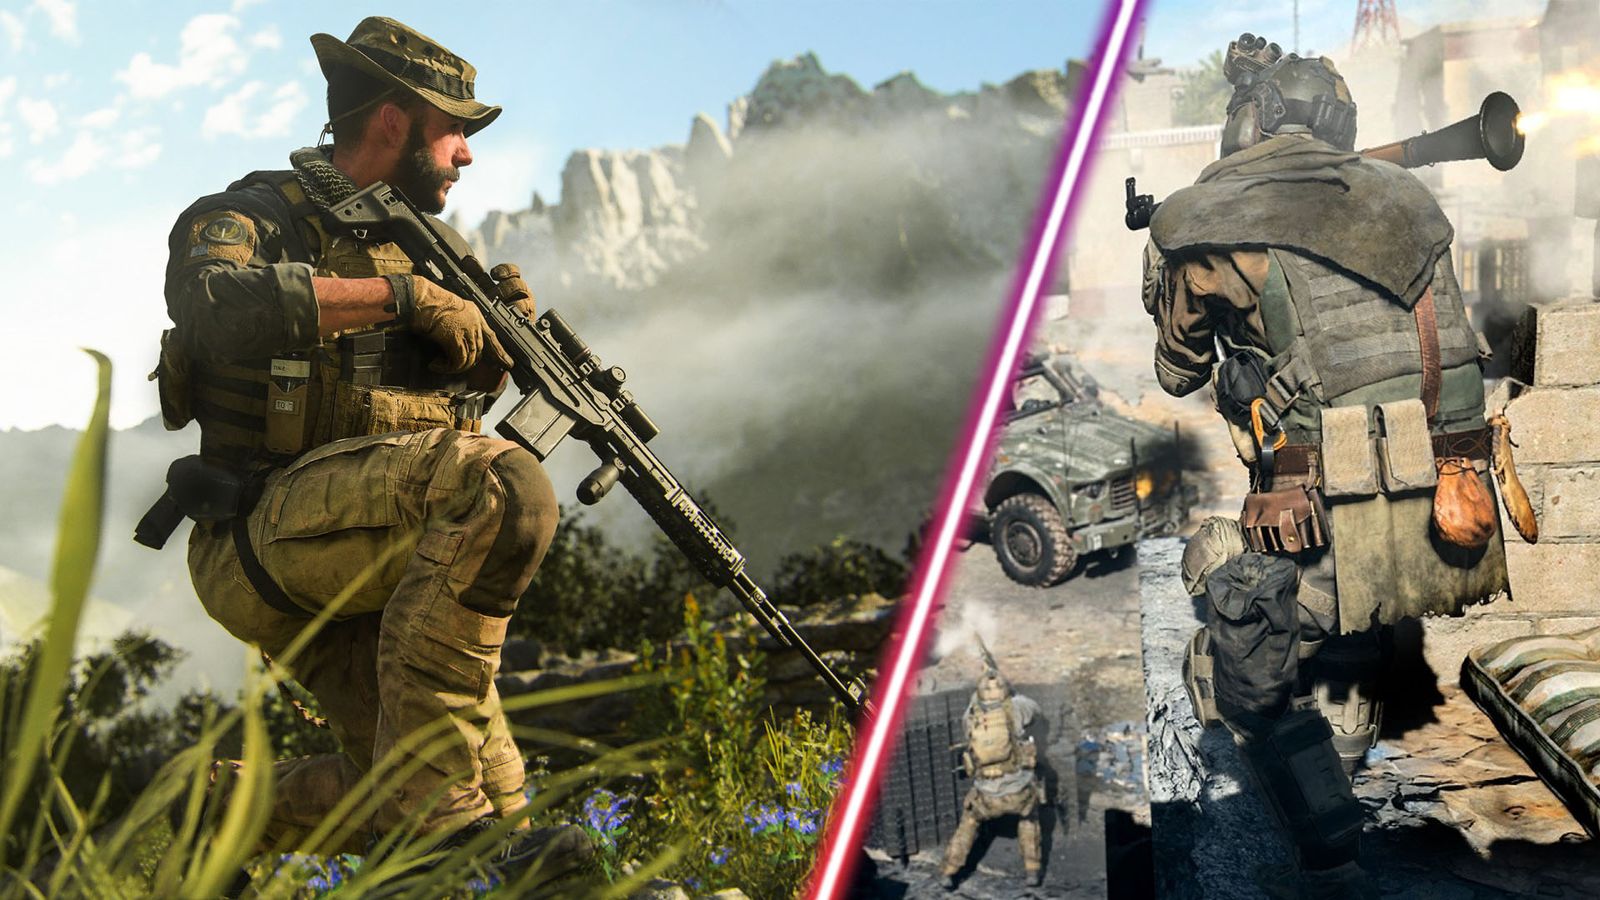 Call of Duty Captain Price crouched holding gun and player firing RPG